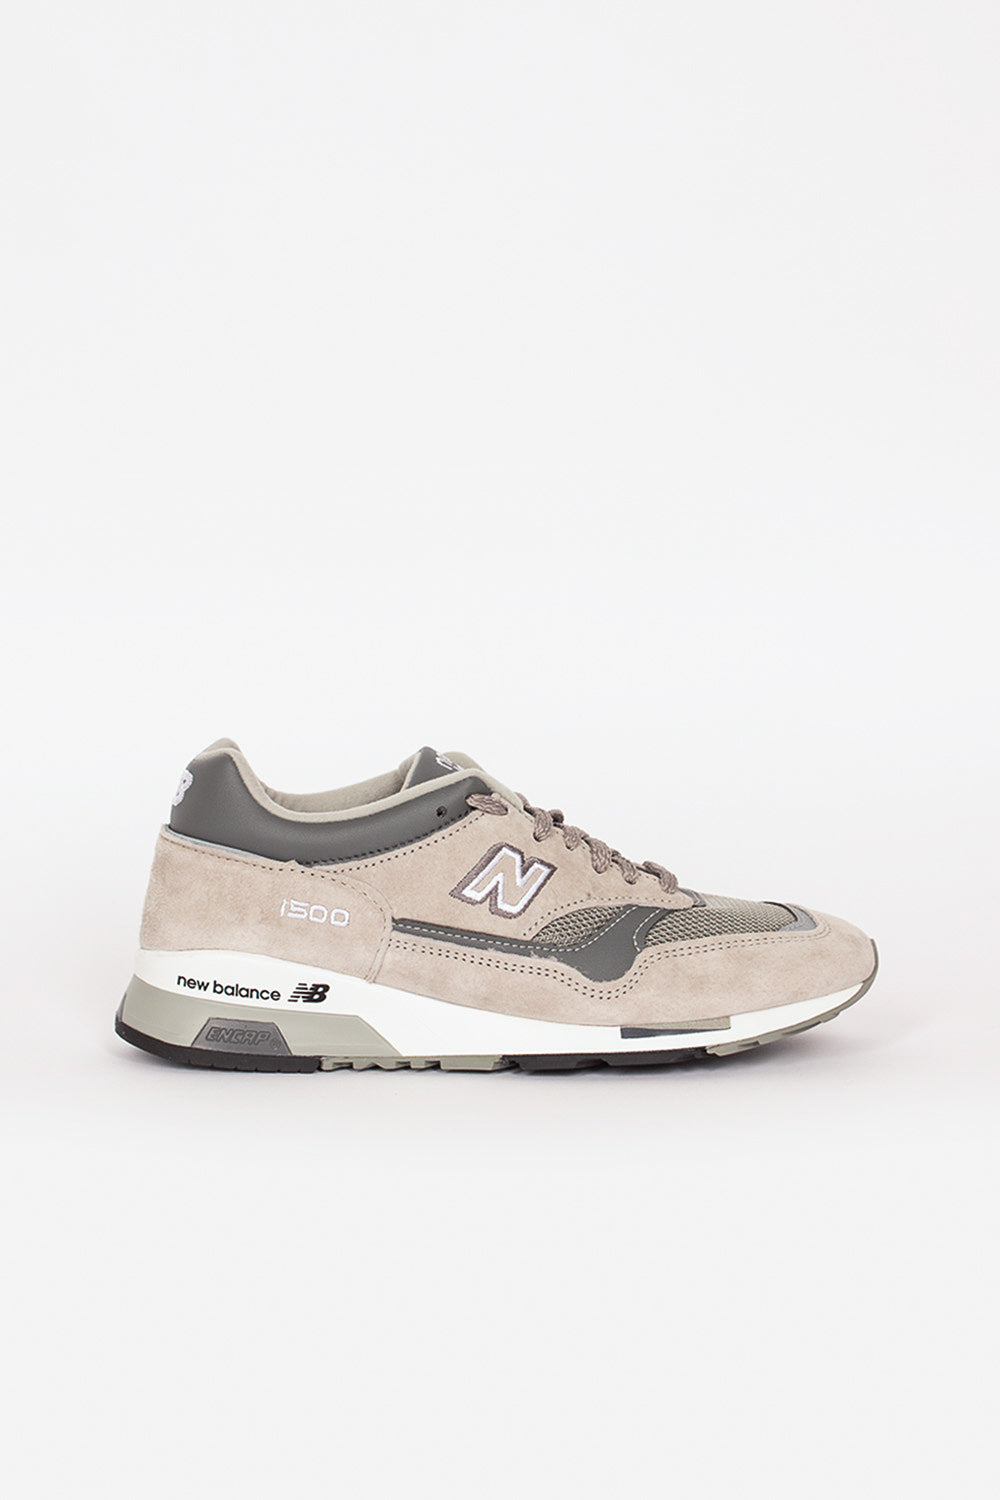 Women's New Balance Trainers Sale | Envoy of Belfast – Tagged "size-uk -5"